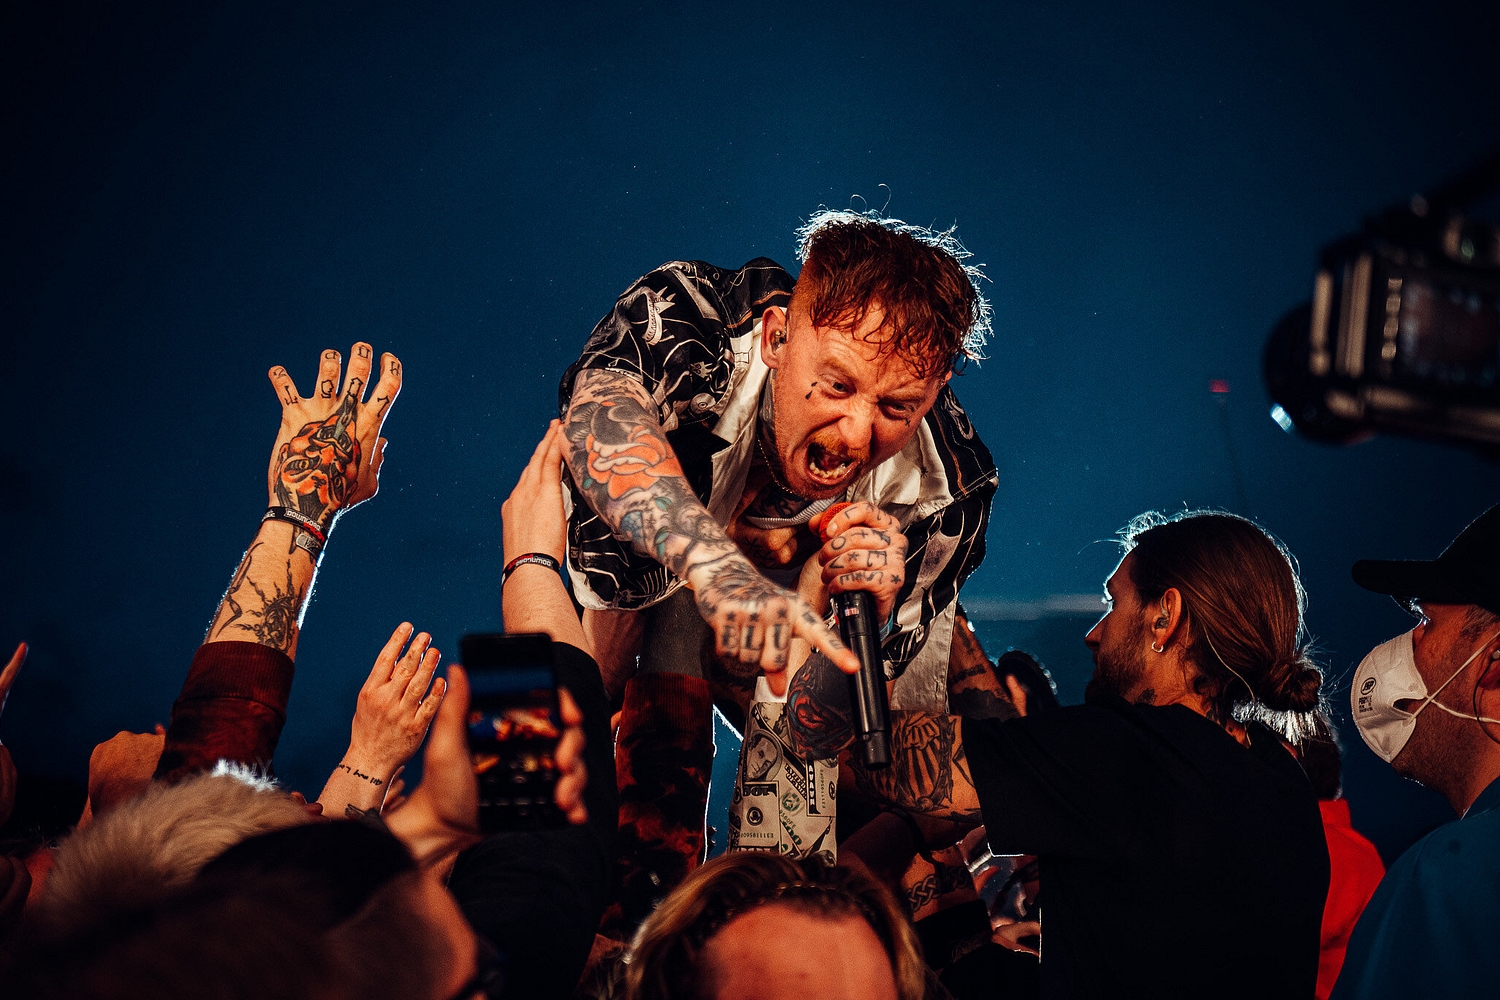 Frank Carter on the future of metal music: “I definitely think metal is going to have its moment where [female vocalists] flip into the mainstream”